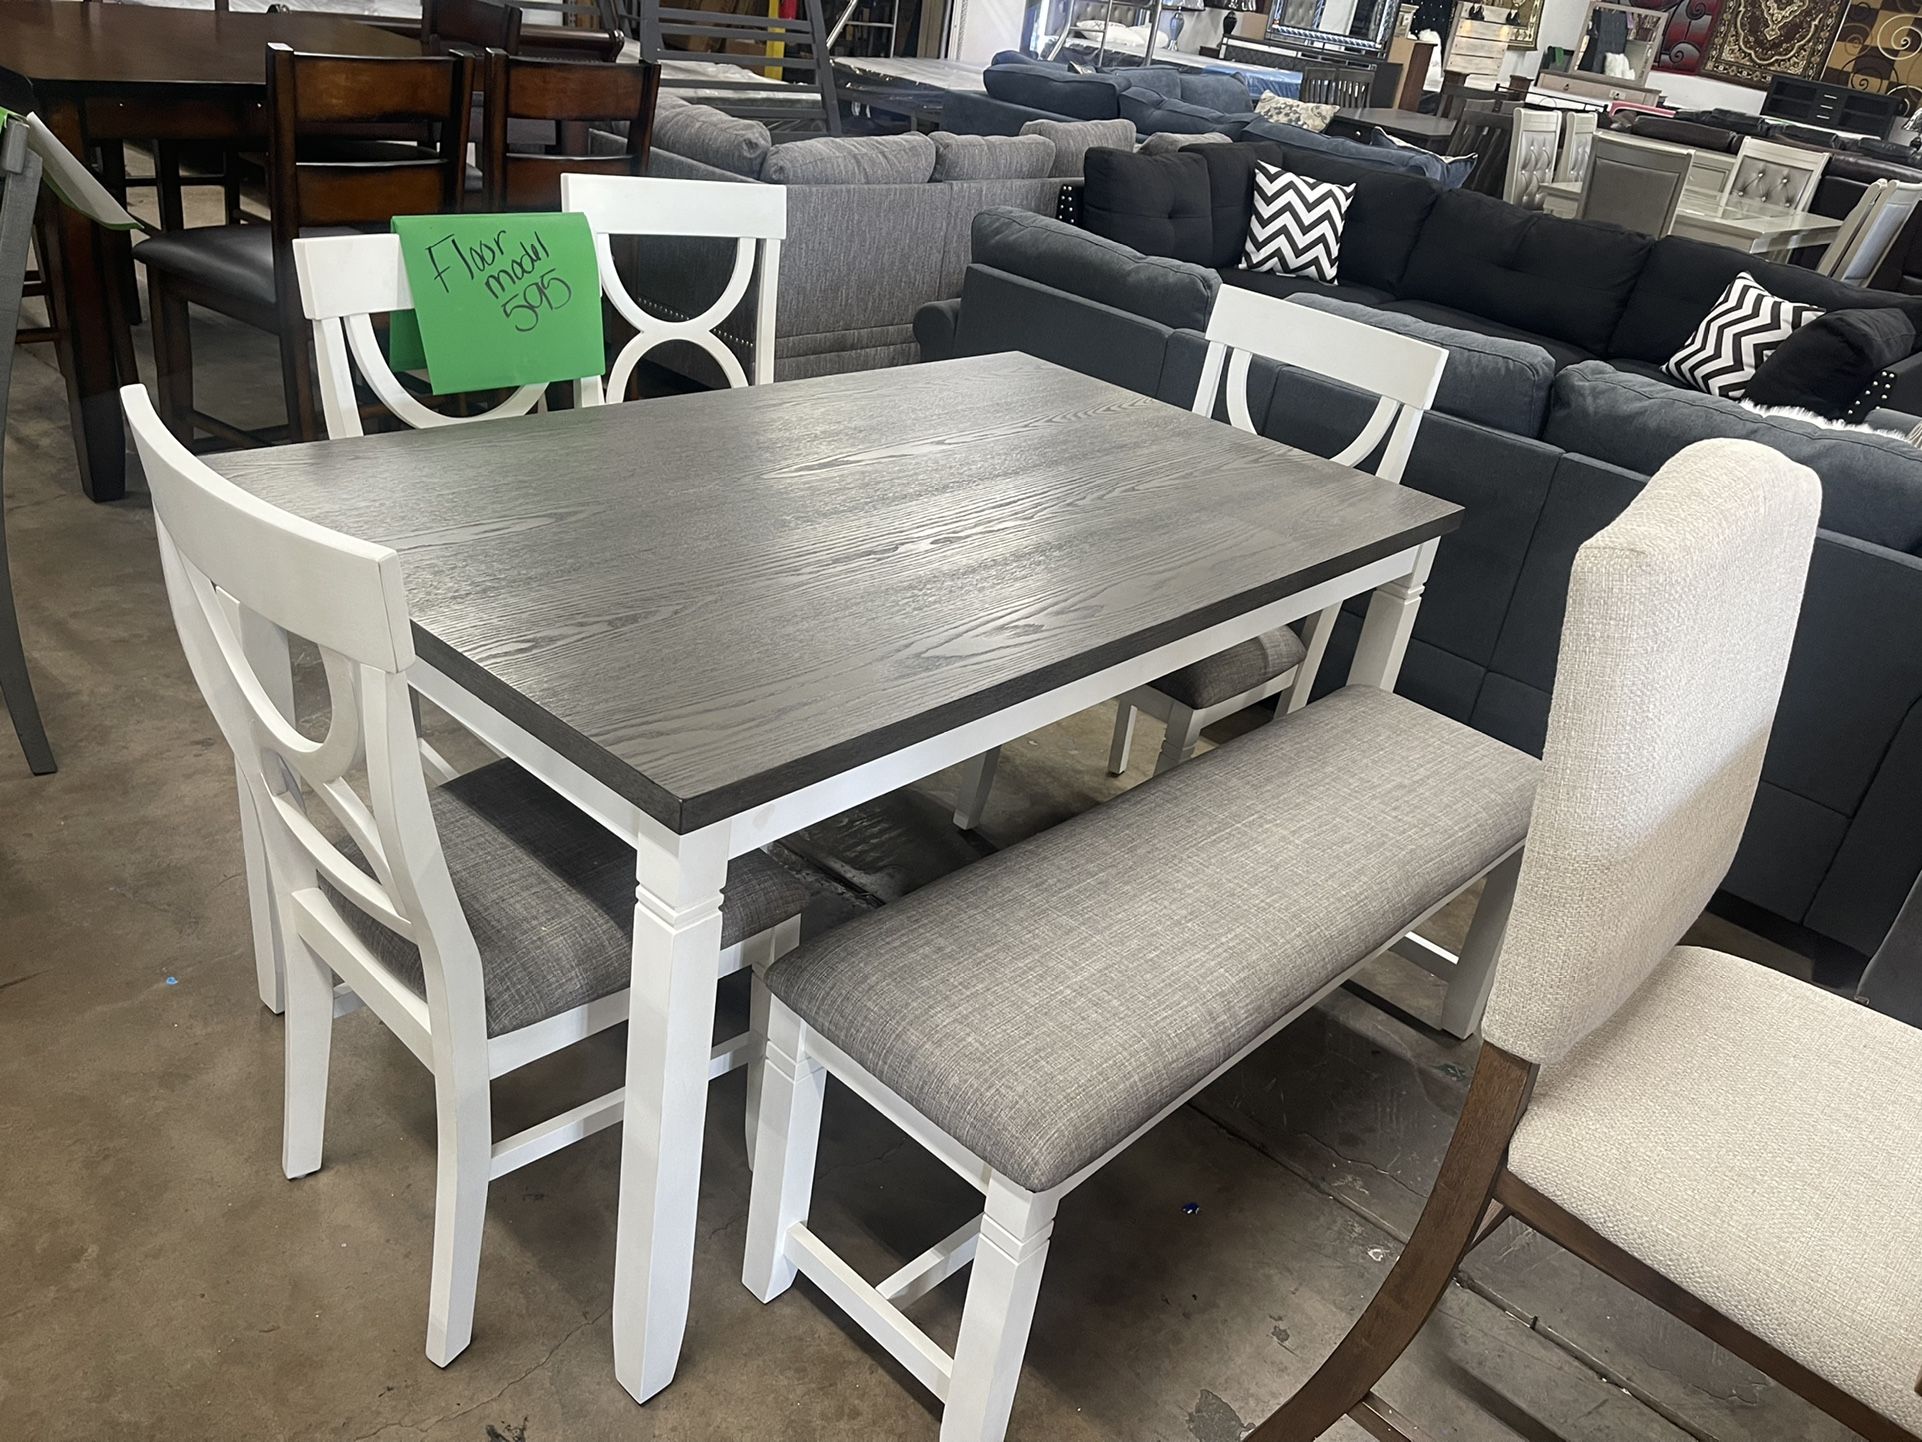 🖤🖤Cash deal firm❤️❤️ $499 floor model farm house table chairs and bench 